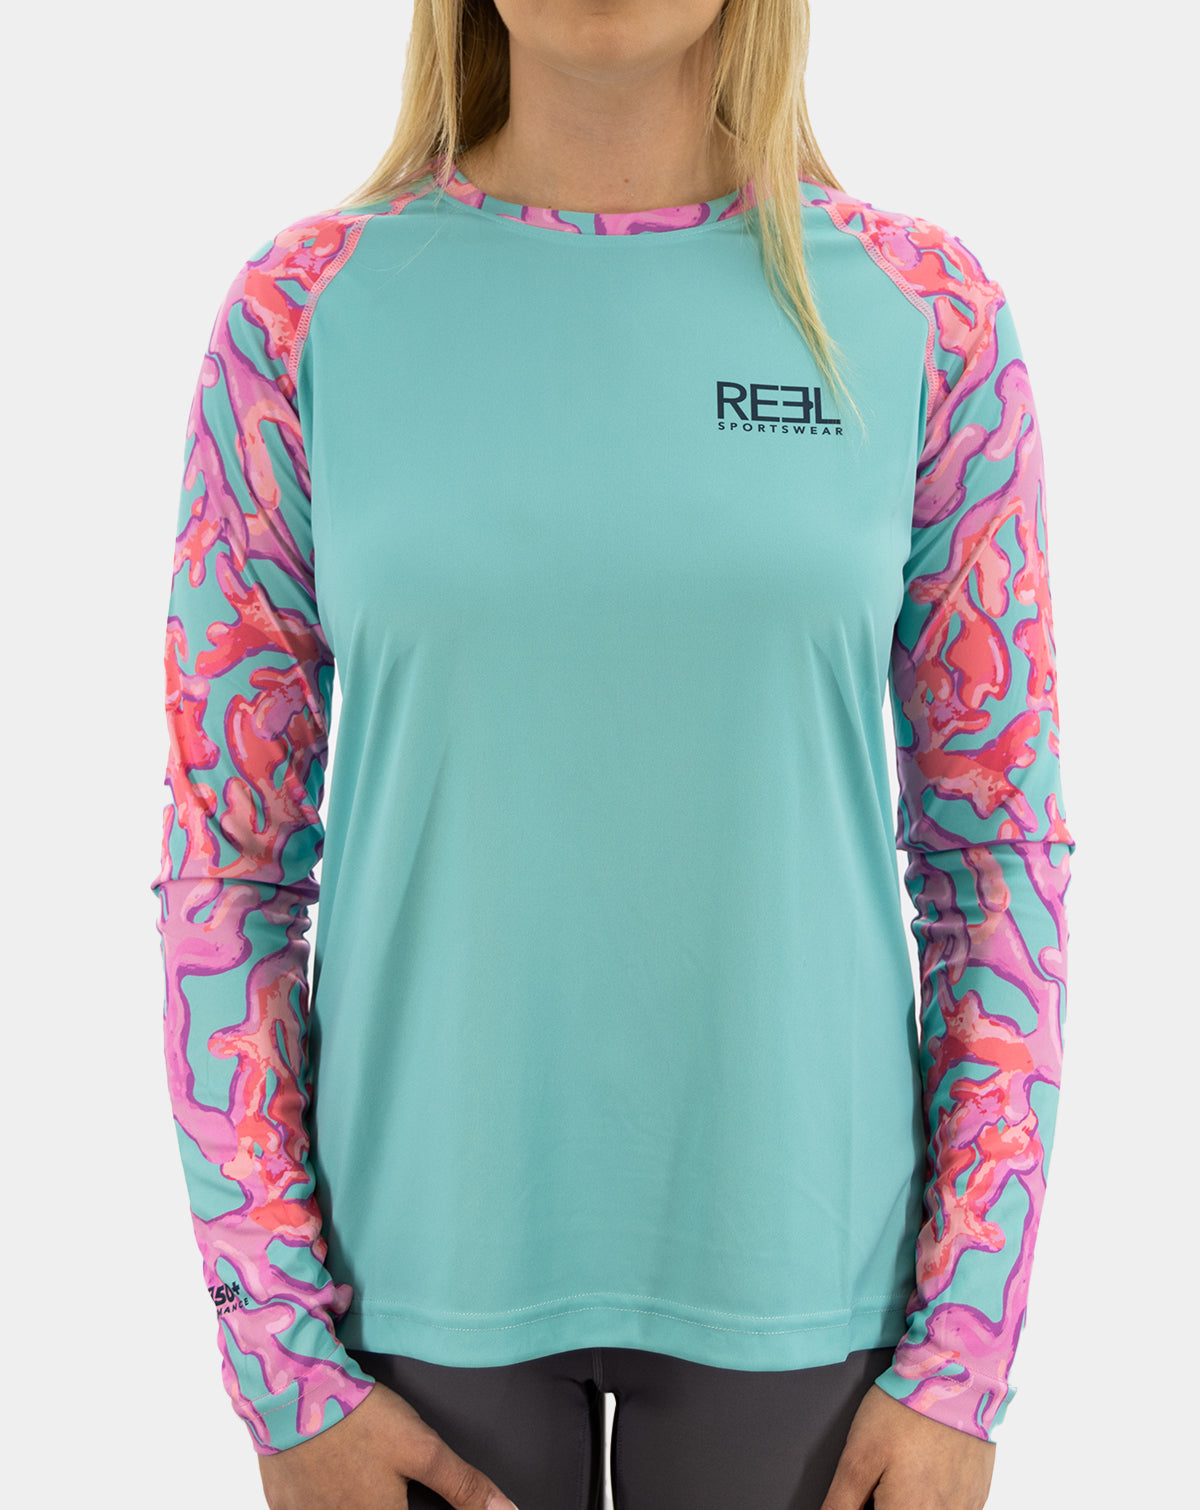 Womens Fishing Shirts for Everyday Style